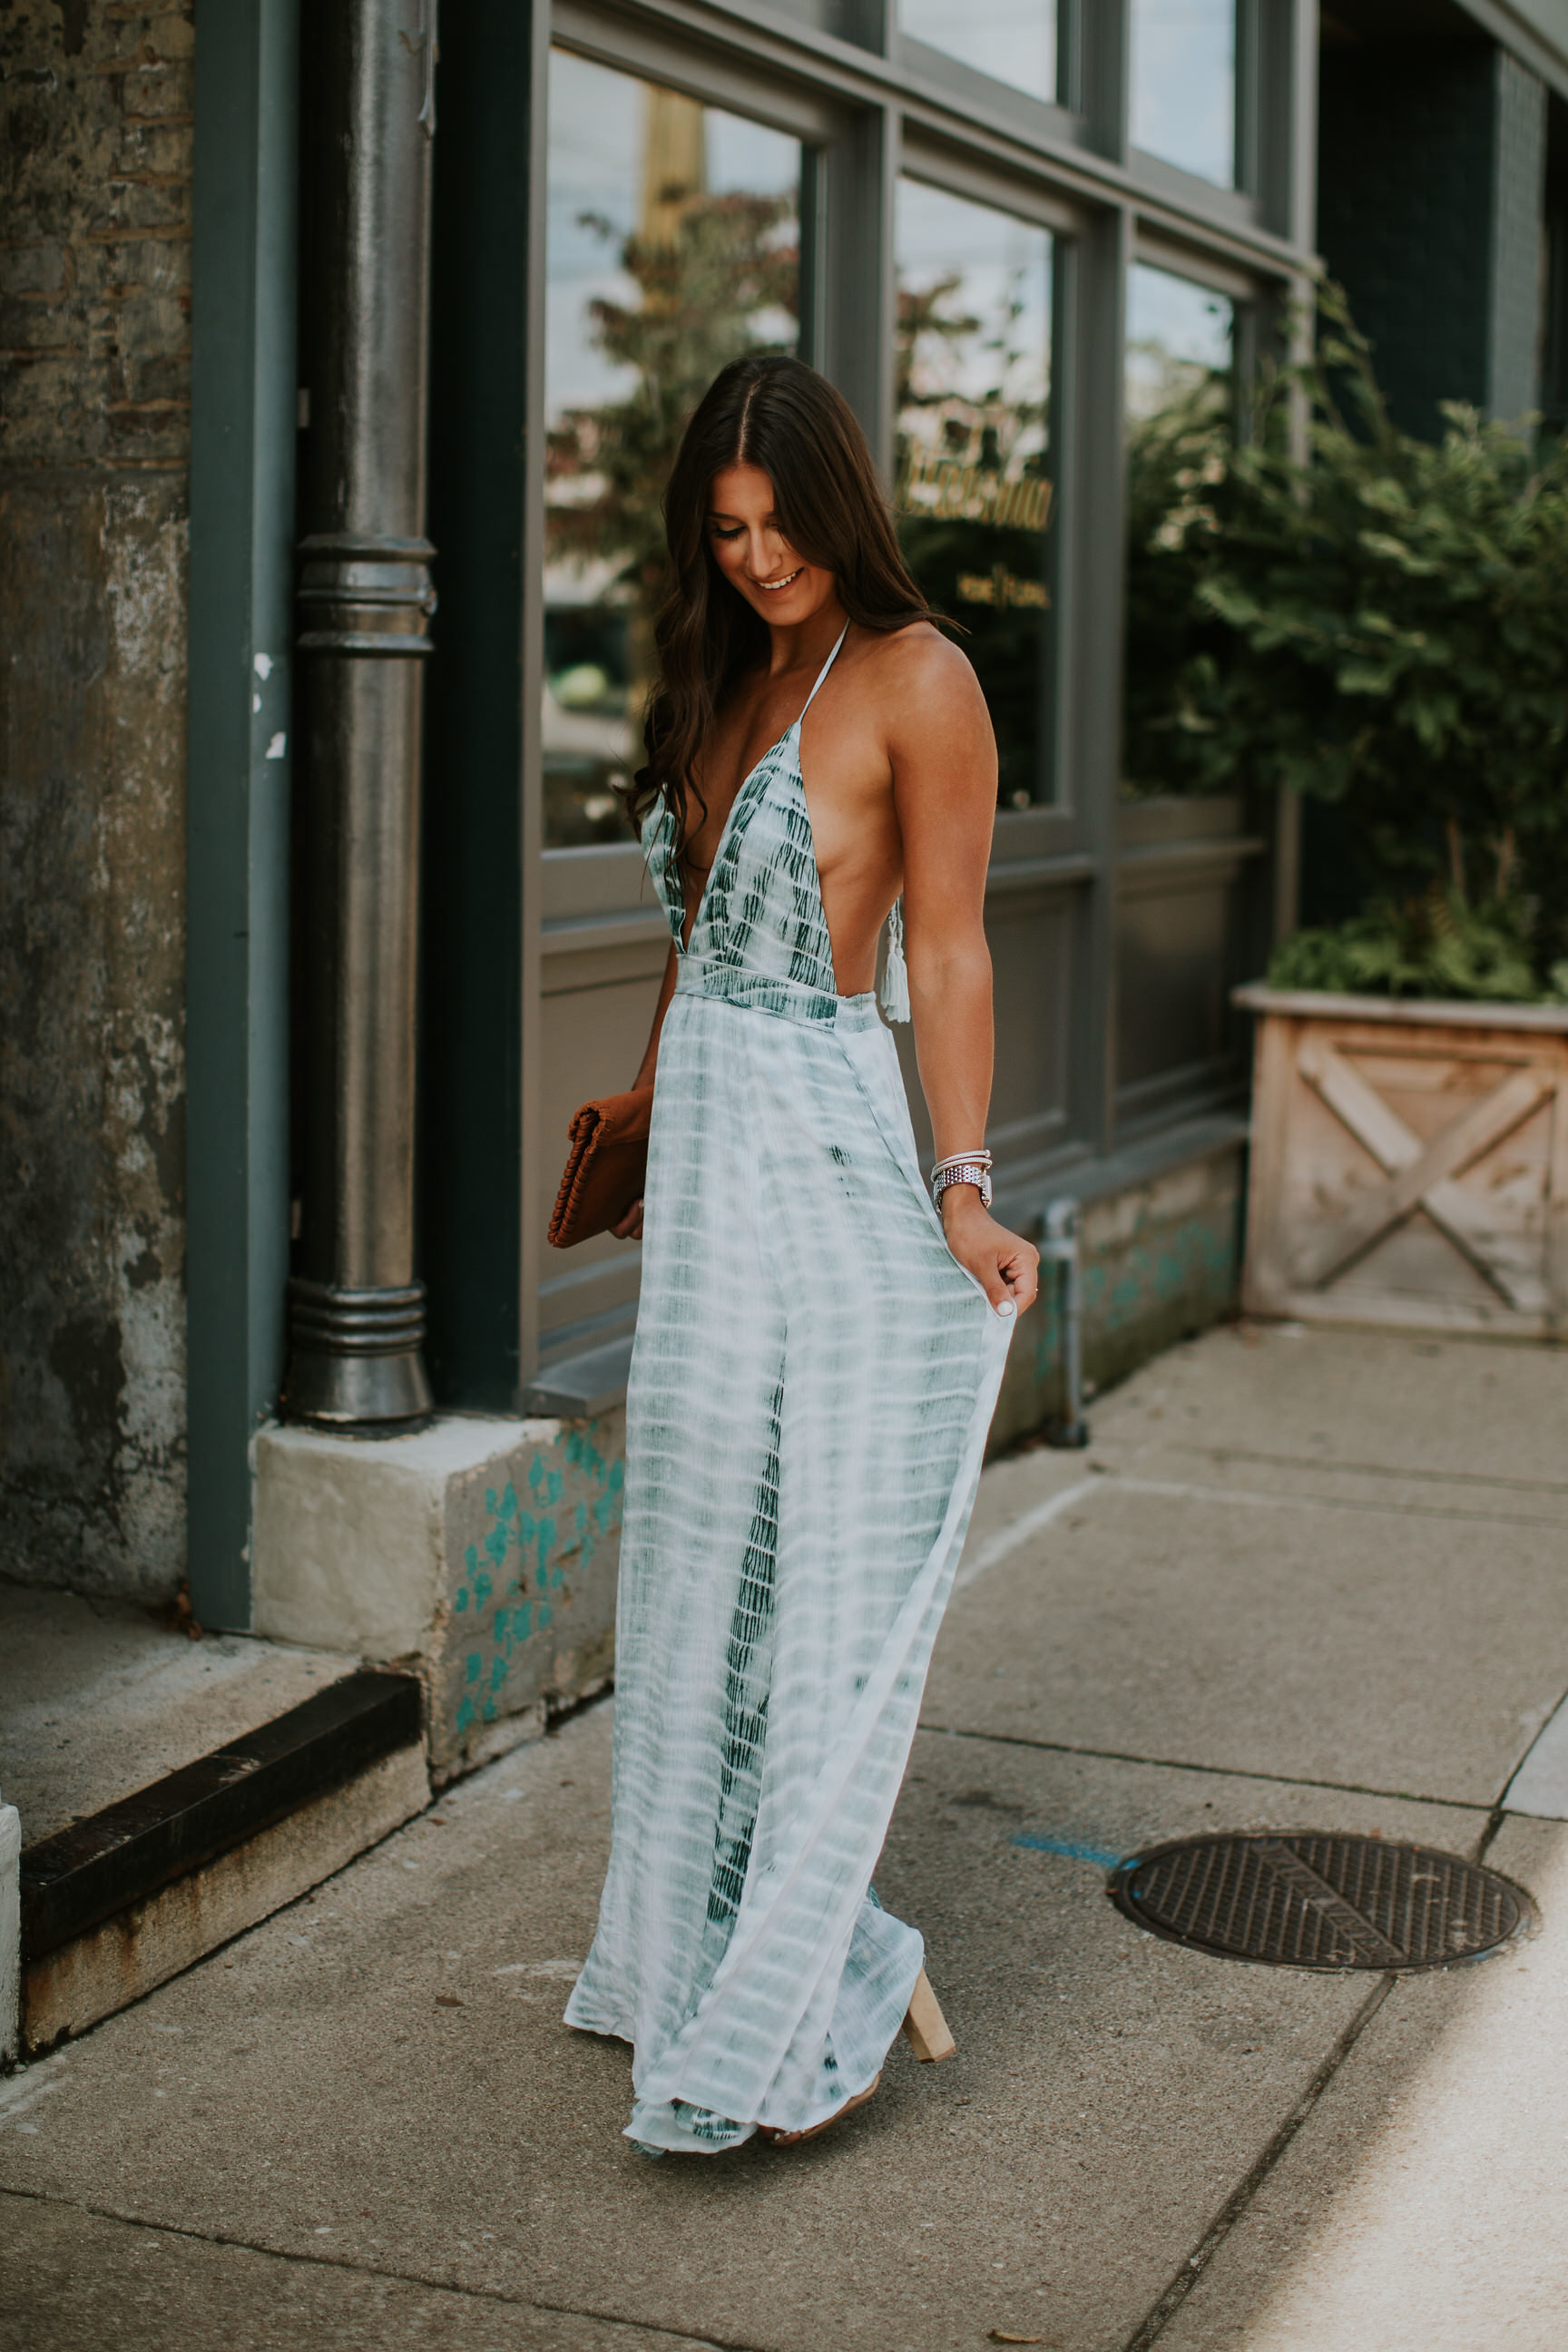 tie dye maxi dress, maxi dresses, summer maxi, nordstrom maxi dresses, red dress maxi dress, sole society clutch, summer outfit, summer style, summer outfit ideas // grace wainwright a southern drawl